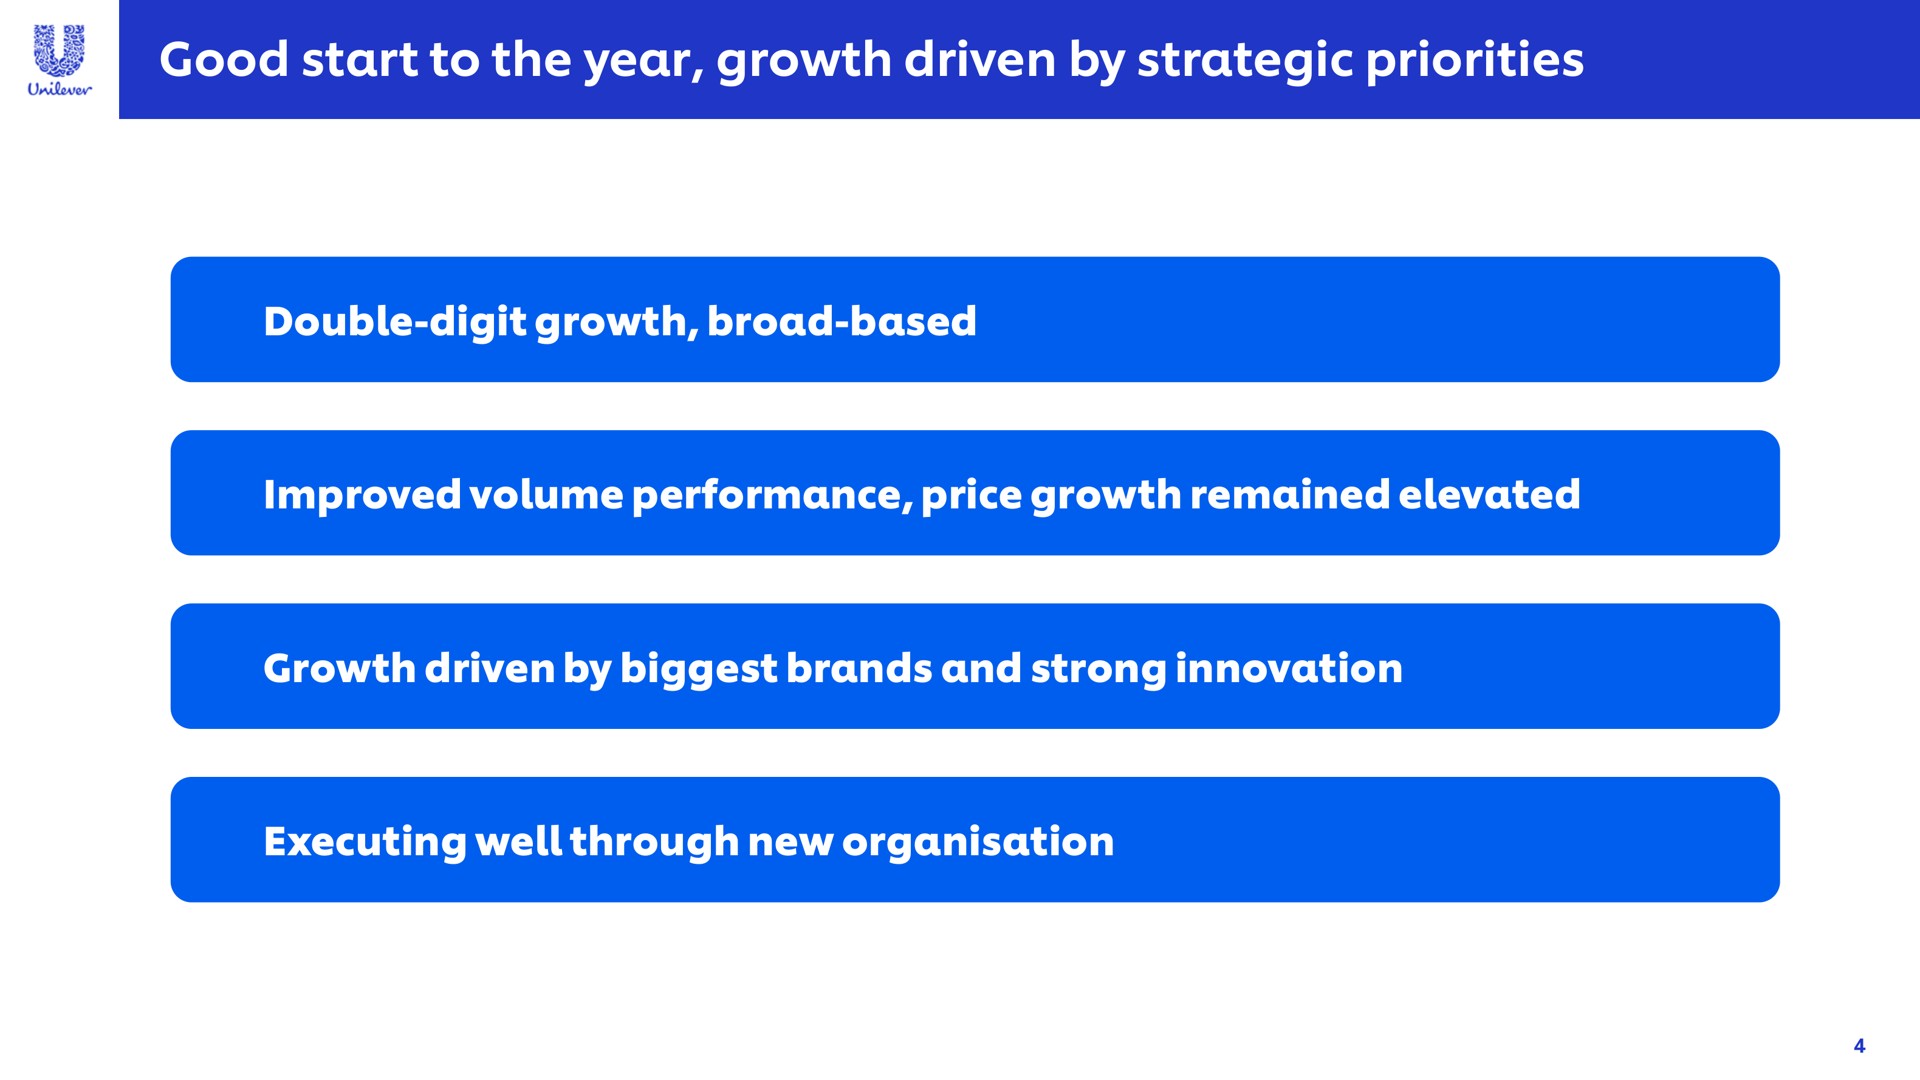 good start to the year growth driven by strategic priorities double digit broad based improved volume performance price remained elevated biggest brands and strong innovation executing well through new | Unilever